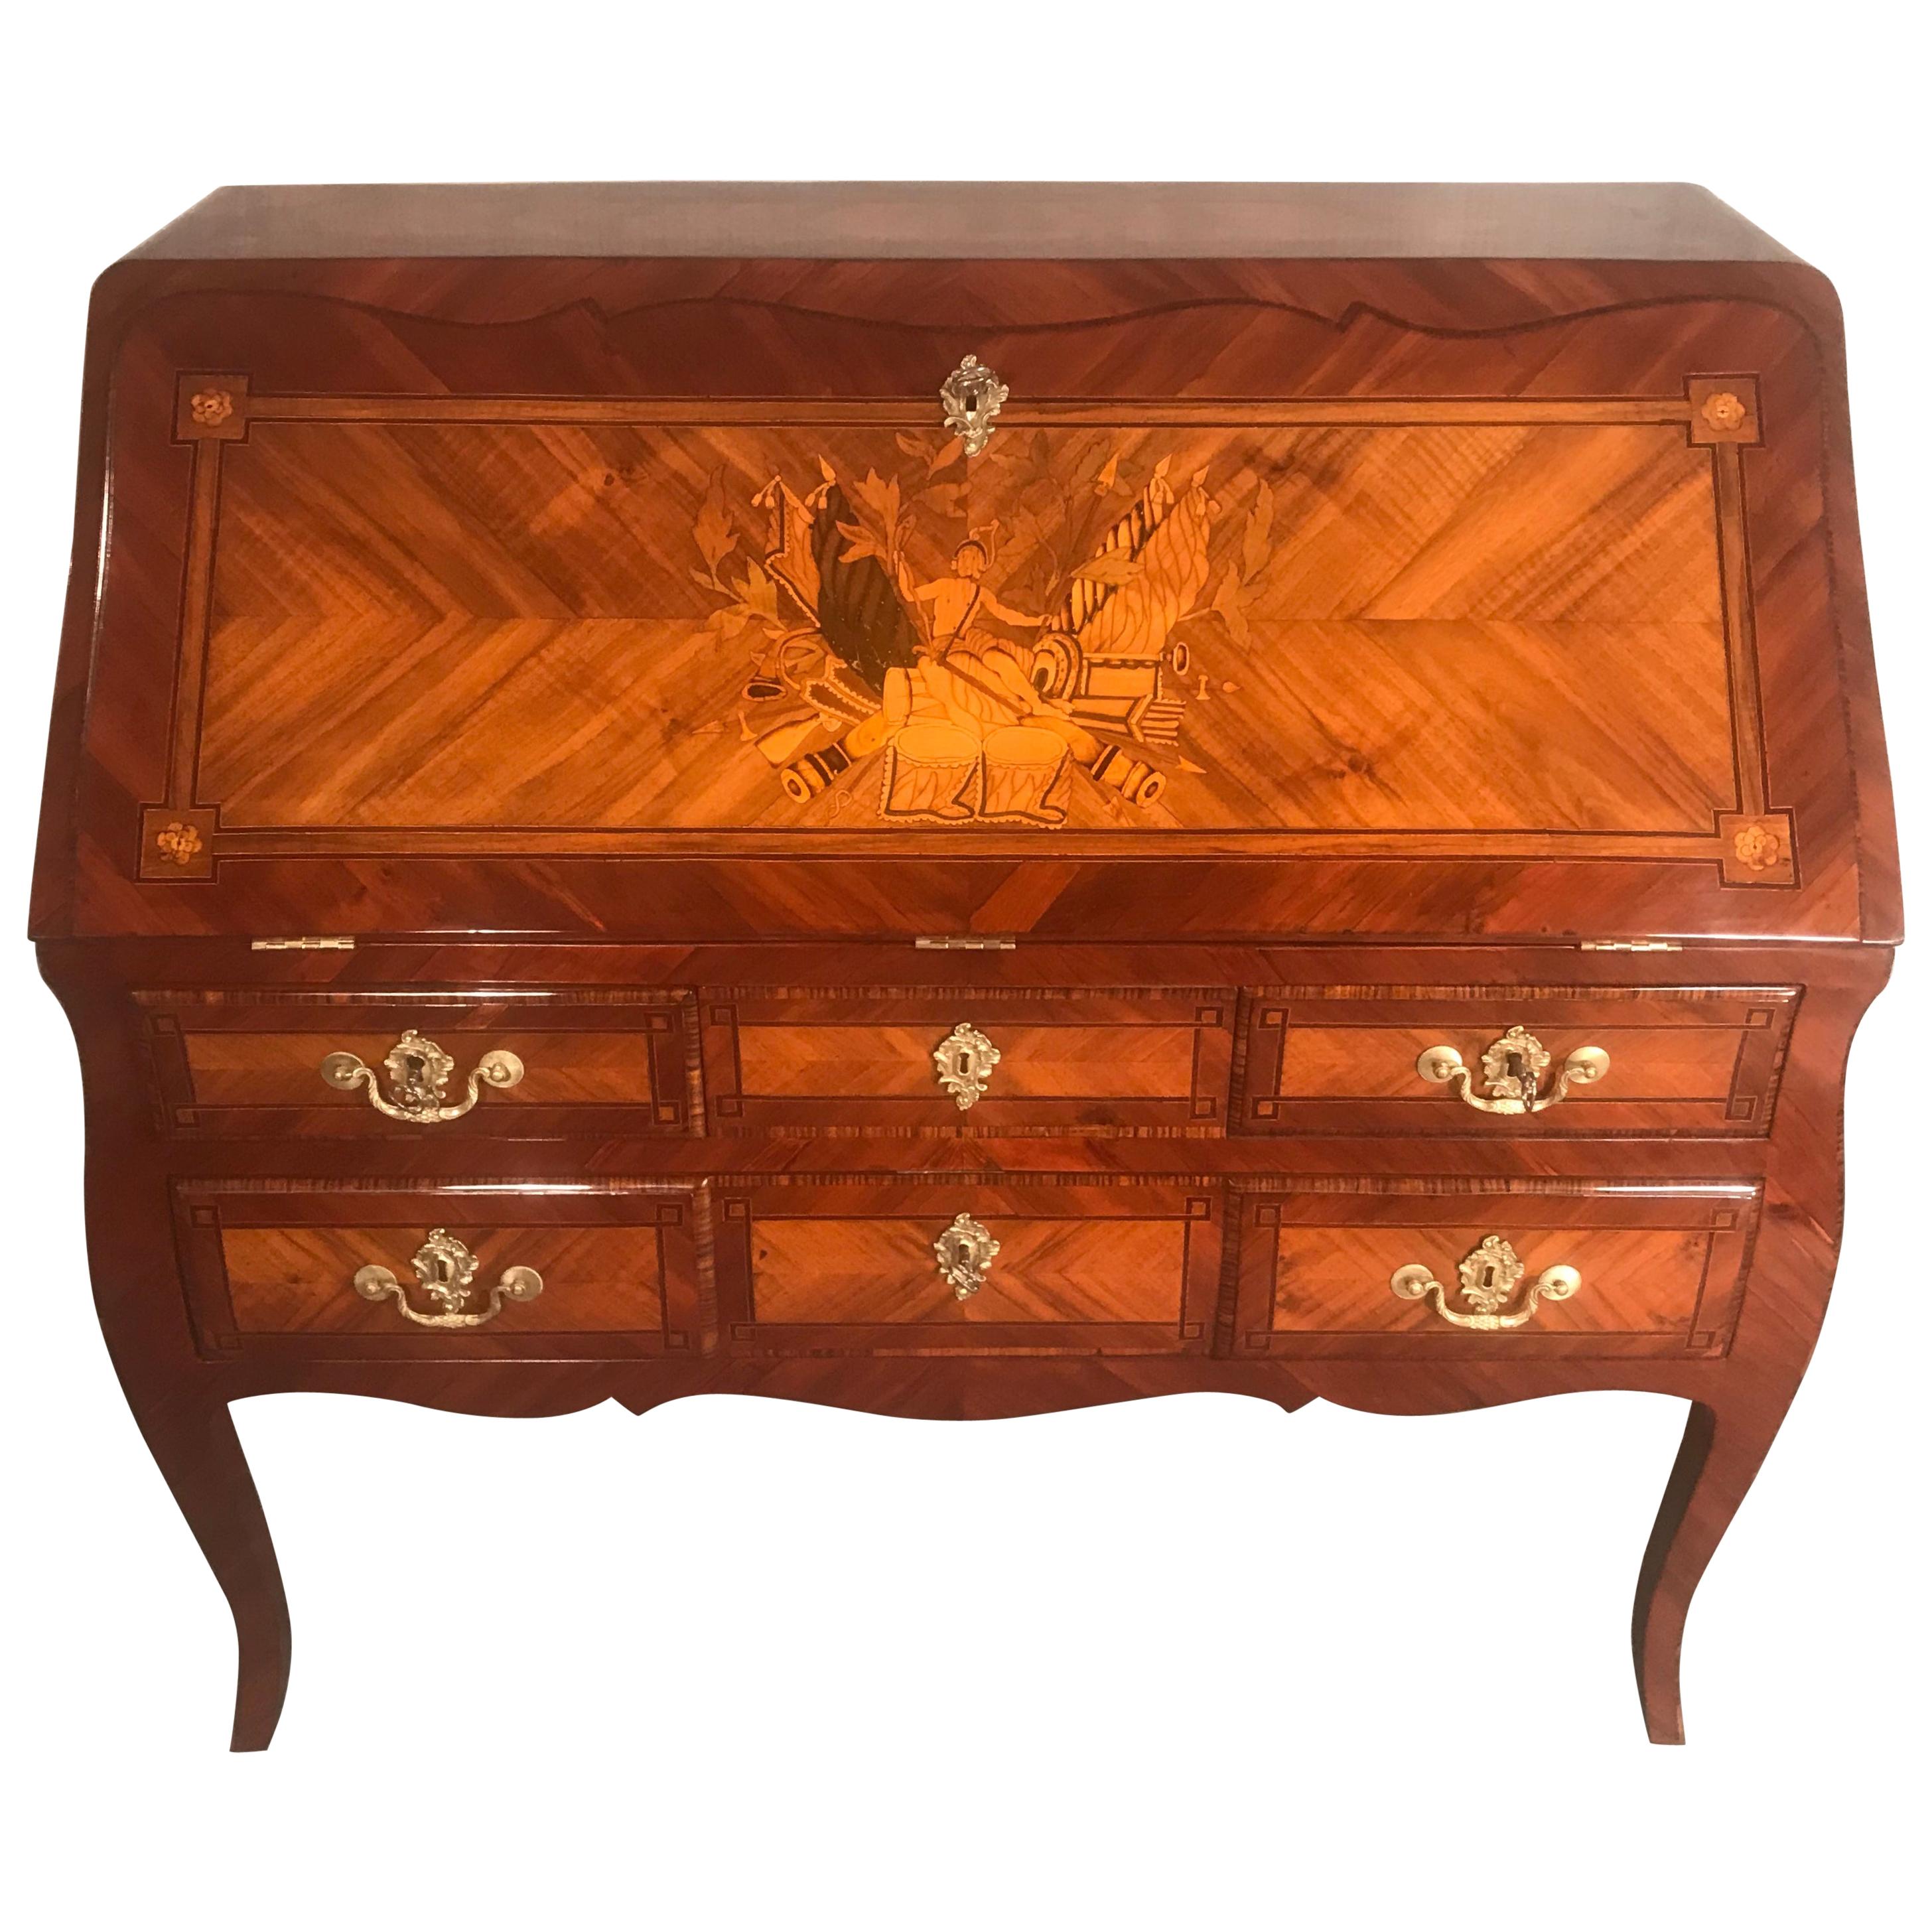 Louis XV secretaire, France, 1770.
Beautiful walnut veneer with plum, satinwood and kingwood marquetry.
Exquisite figural marquetry on the outside of the writing top.
The writing surface is covered with leather (replaced). The inside of the